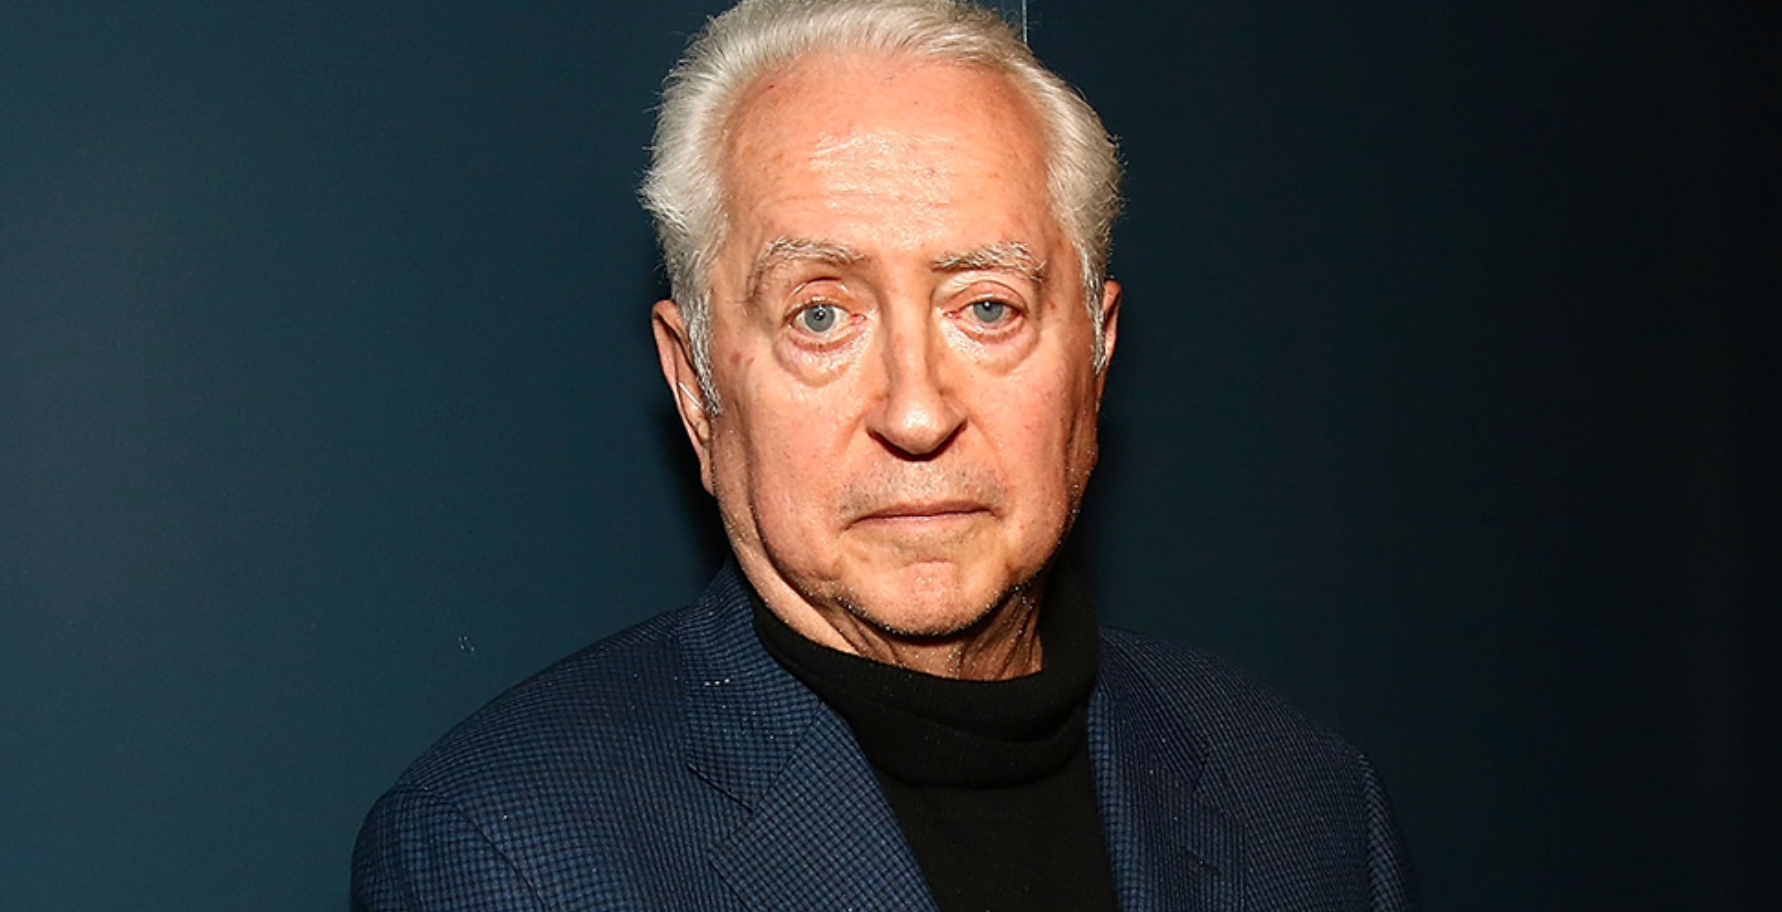 NEW YORK, NY - MAY 20: Filmmaker Robert Downey, Sr poses for photos during 'An Evening With Robert Downey, Sr.' at Film Forum on May 20, 2016 in New York City. (Photo by Astrid Stawiarz/Getty Images)